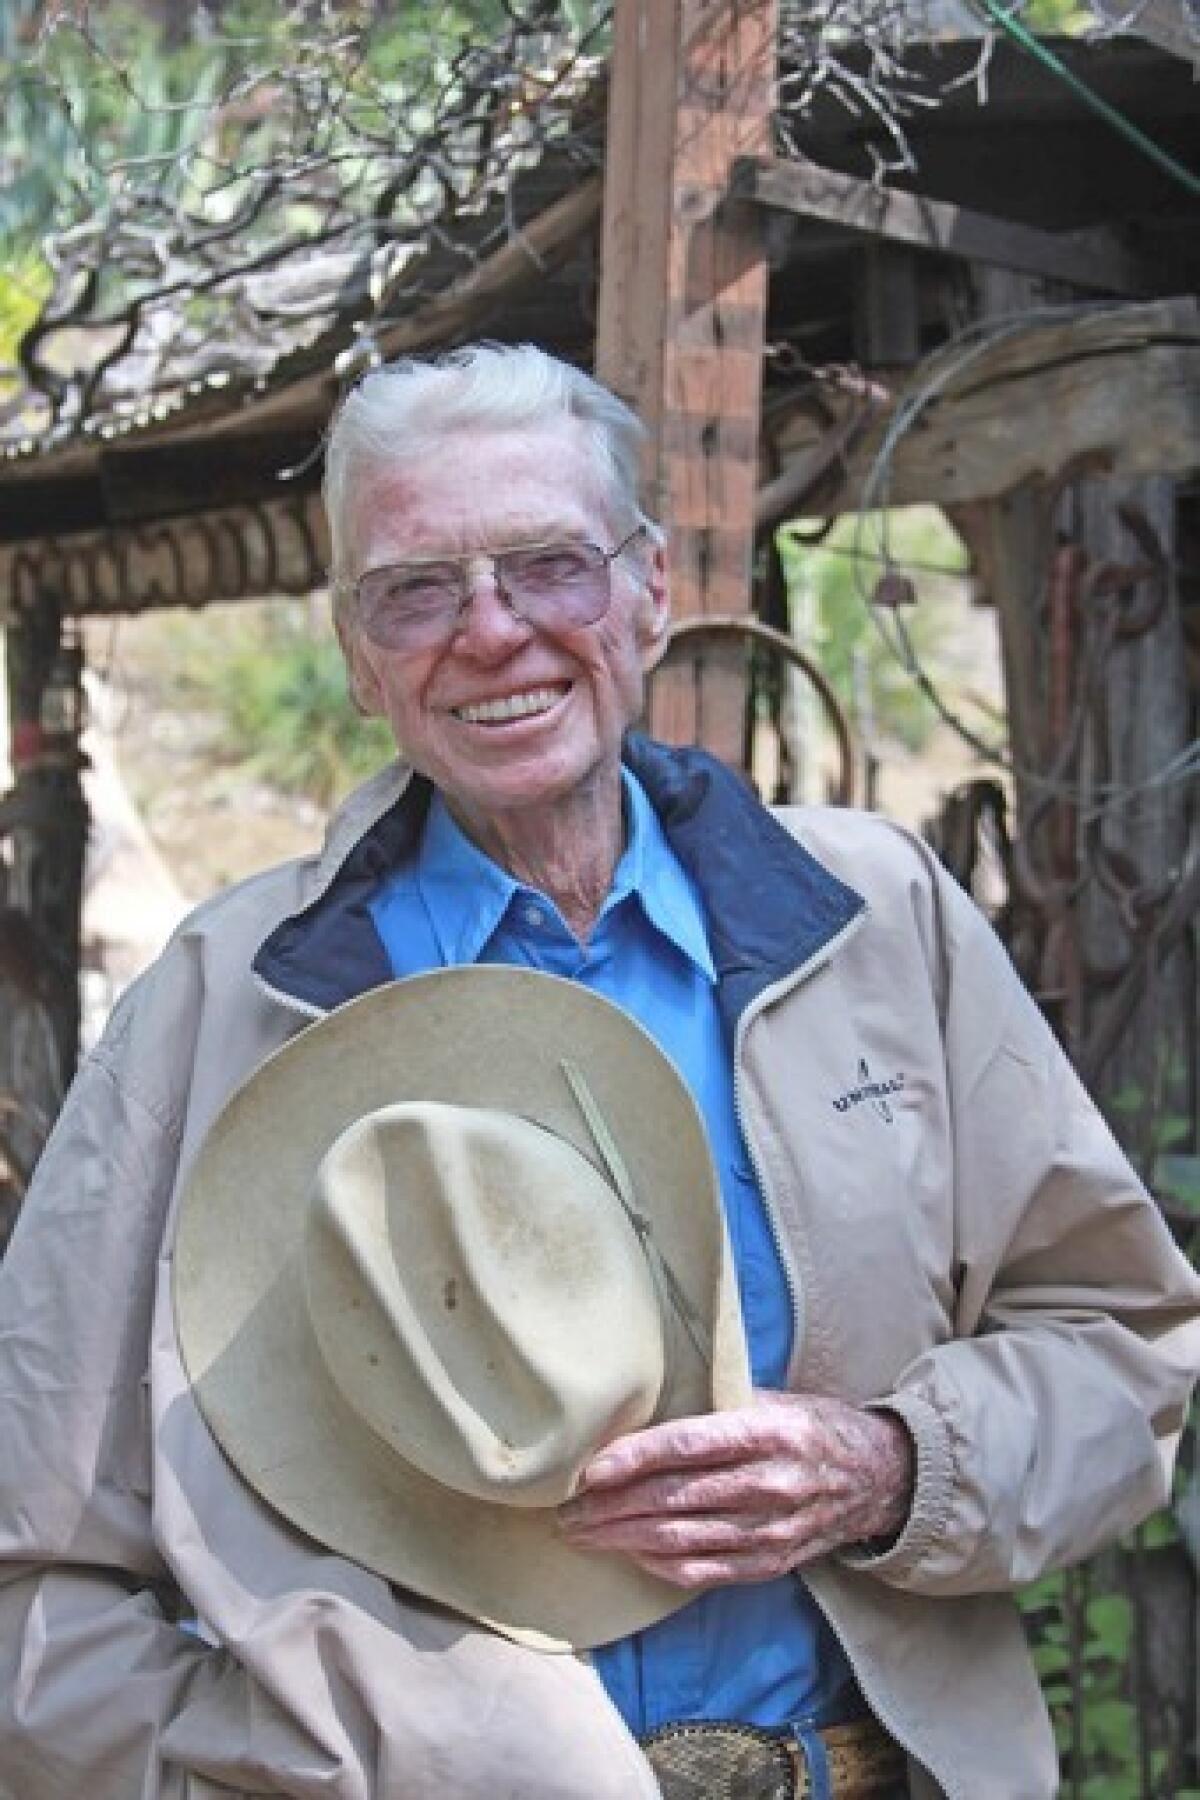 Dale Rickards, a retired mounted officer for the LAPD, was a horse wrangler for Hollywood.